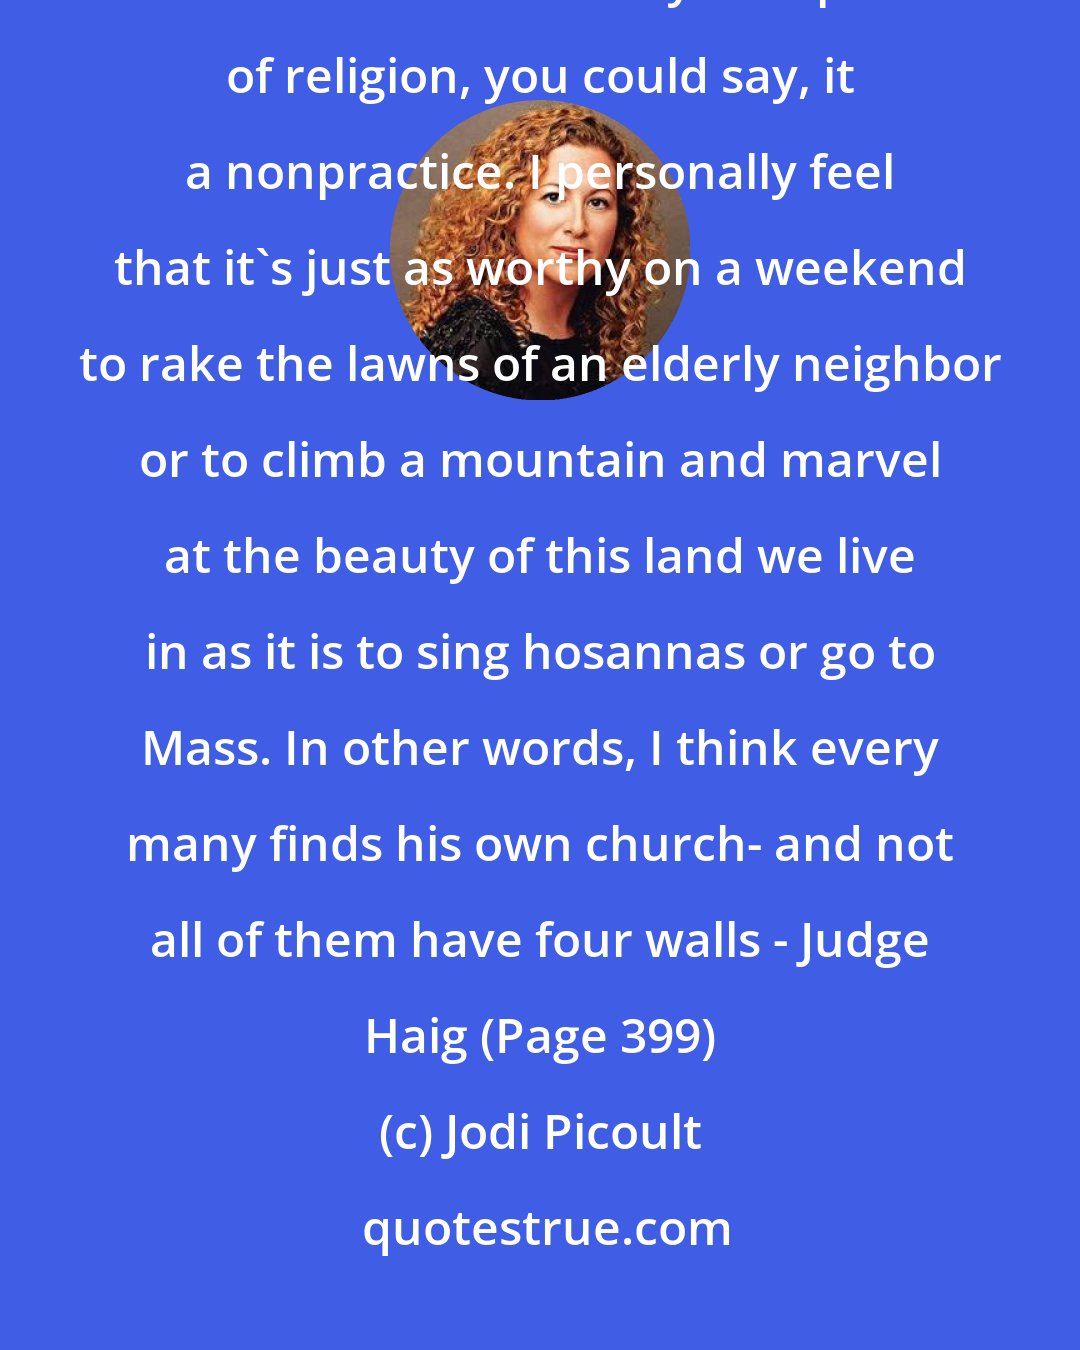 Jodi Picoult: I am not a religious man. I have not attended a service for many years. But I do believe in God. My own practice of religion, you could say, it a nonpractice. I personally feel that it's just as worthy on a weekend to rake the lawns of an elderly neighbor or to climb a mountain and marvel at the beauty of this land we live in as it is to sing hosannas or go to Mass. In other words, I think every many finds his own church- and not all of them have four walls - Judge Haig (Page 399)